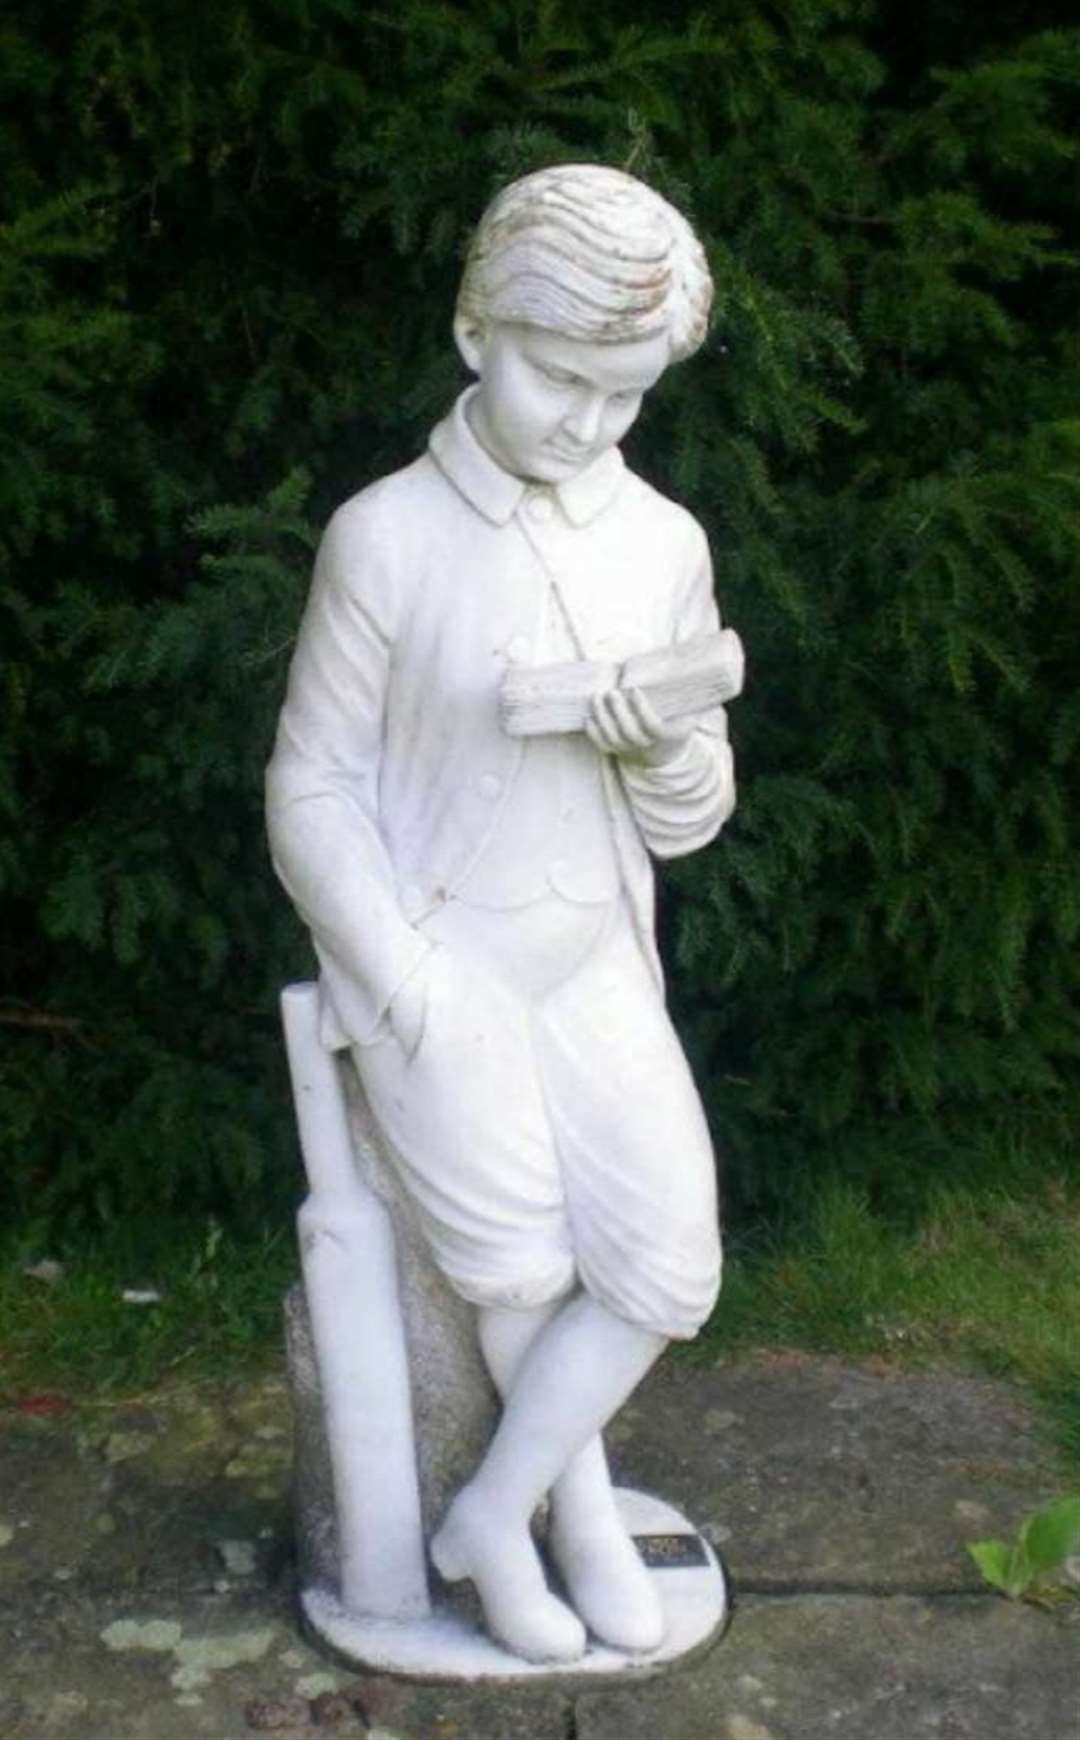 The marble statue of Lord Byron is believed to have been found.